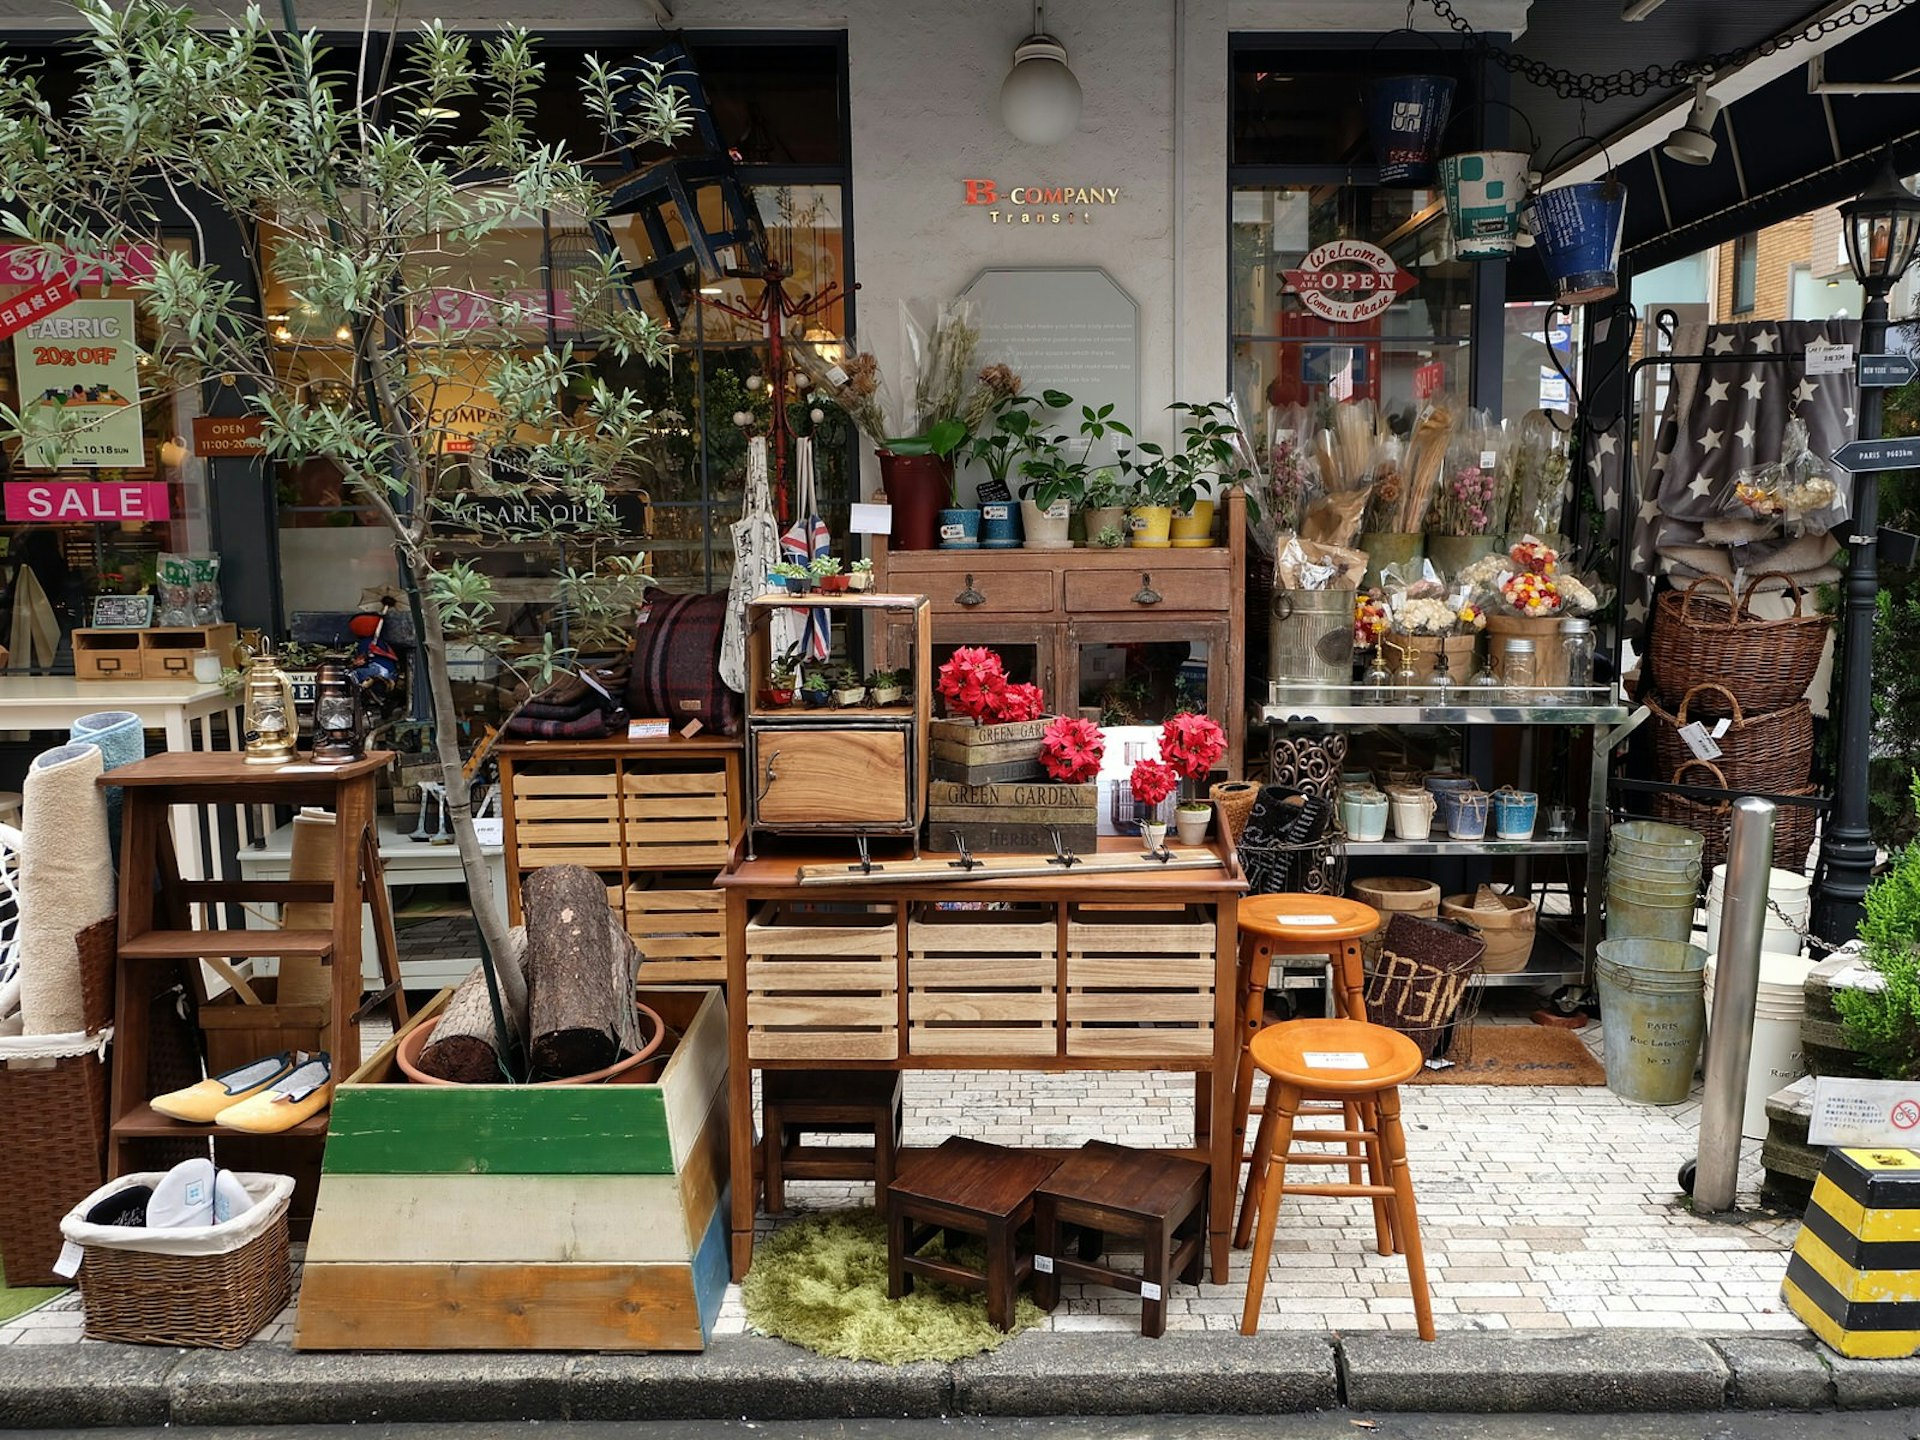 Furniture and other homewares on display outside a store in the Kichijōji area, Tokyo